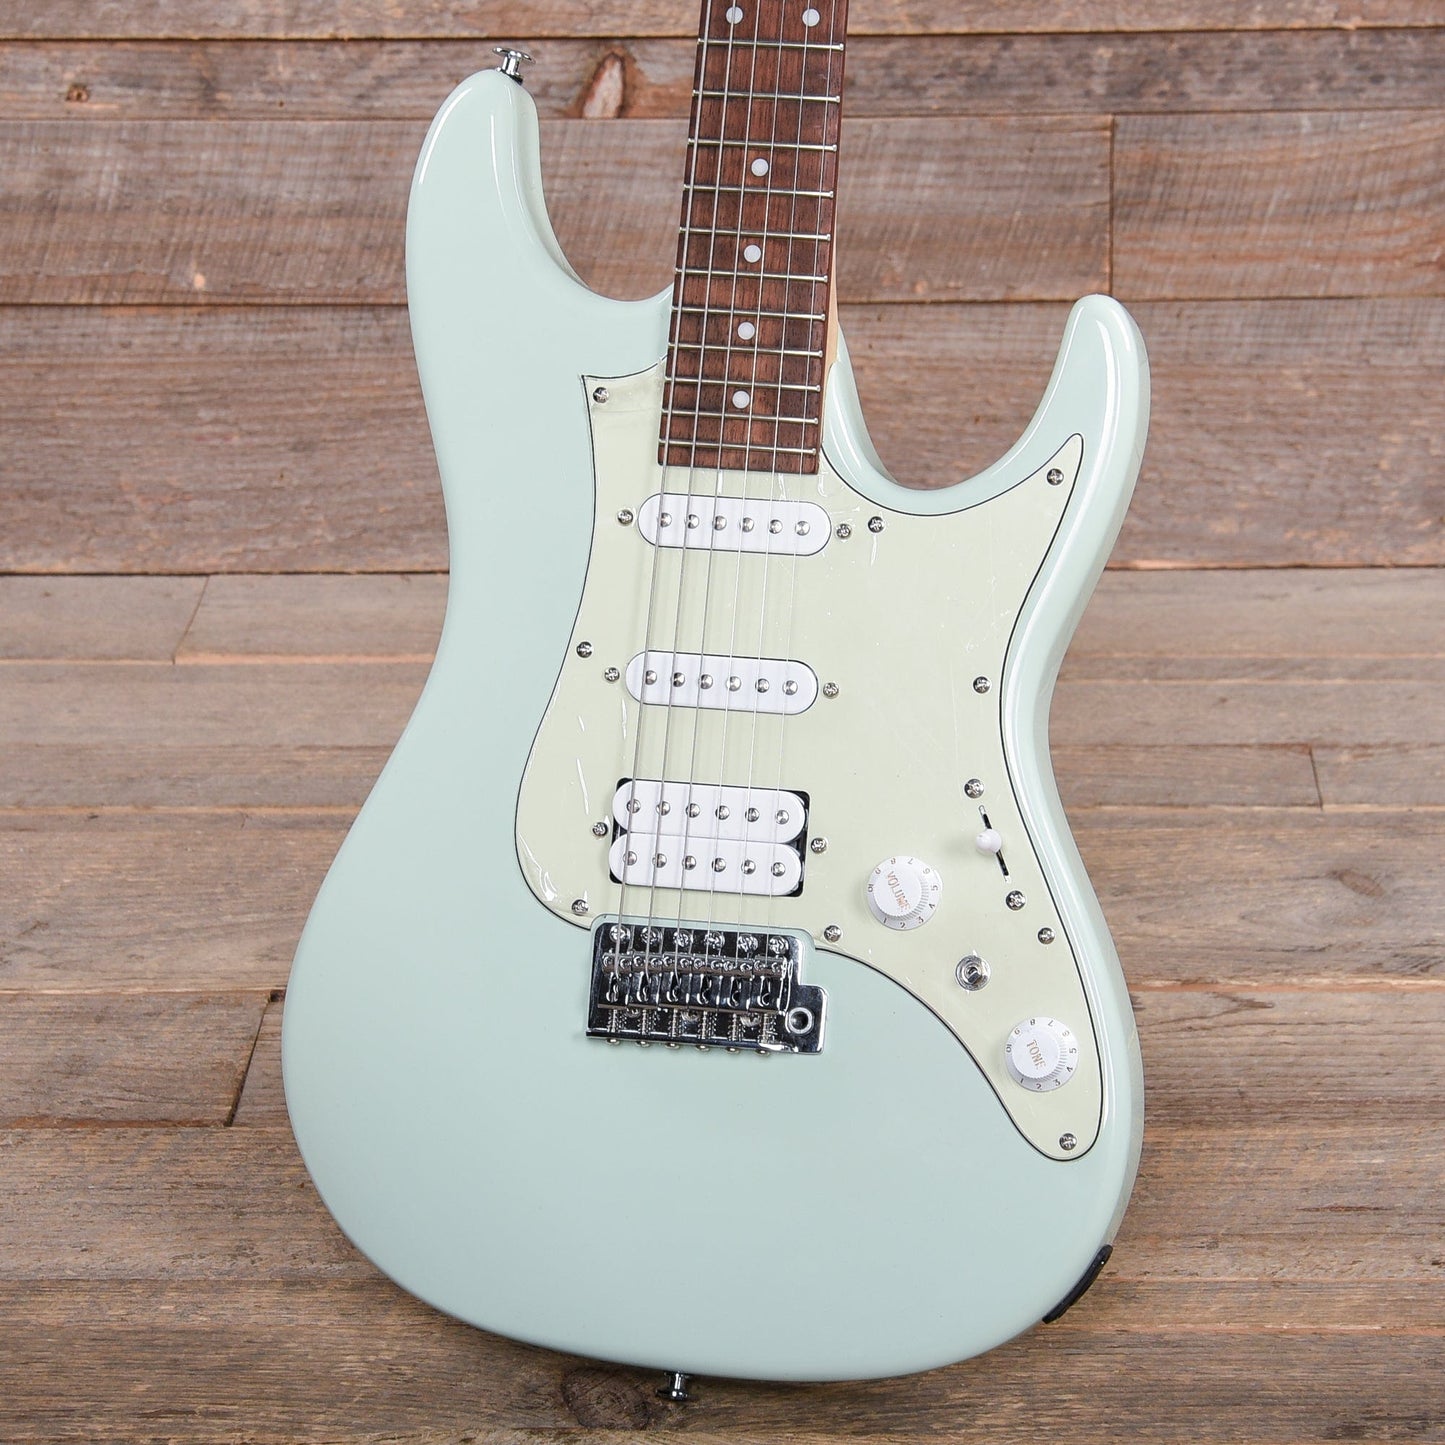 Ibanez AZES40 Standard Mint Green Electric Guitars / Solid Body